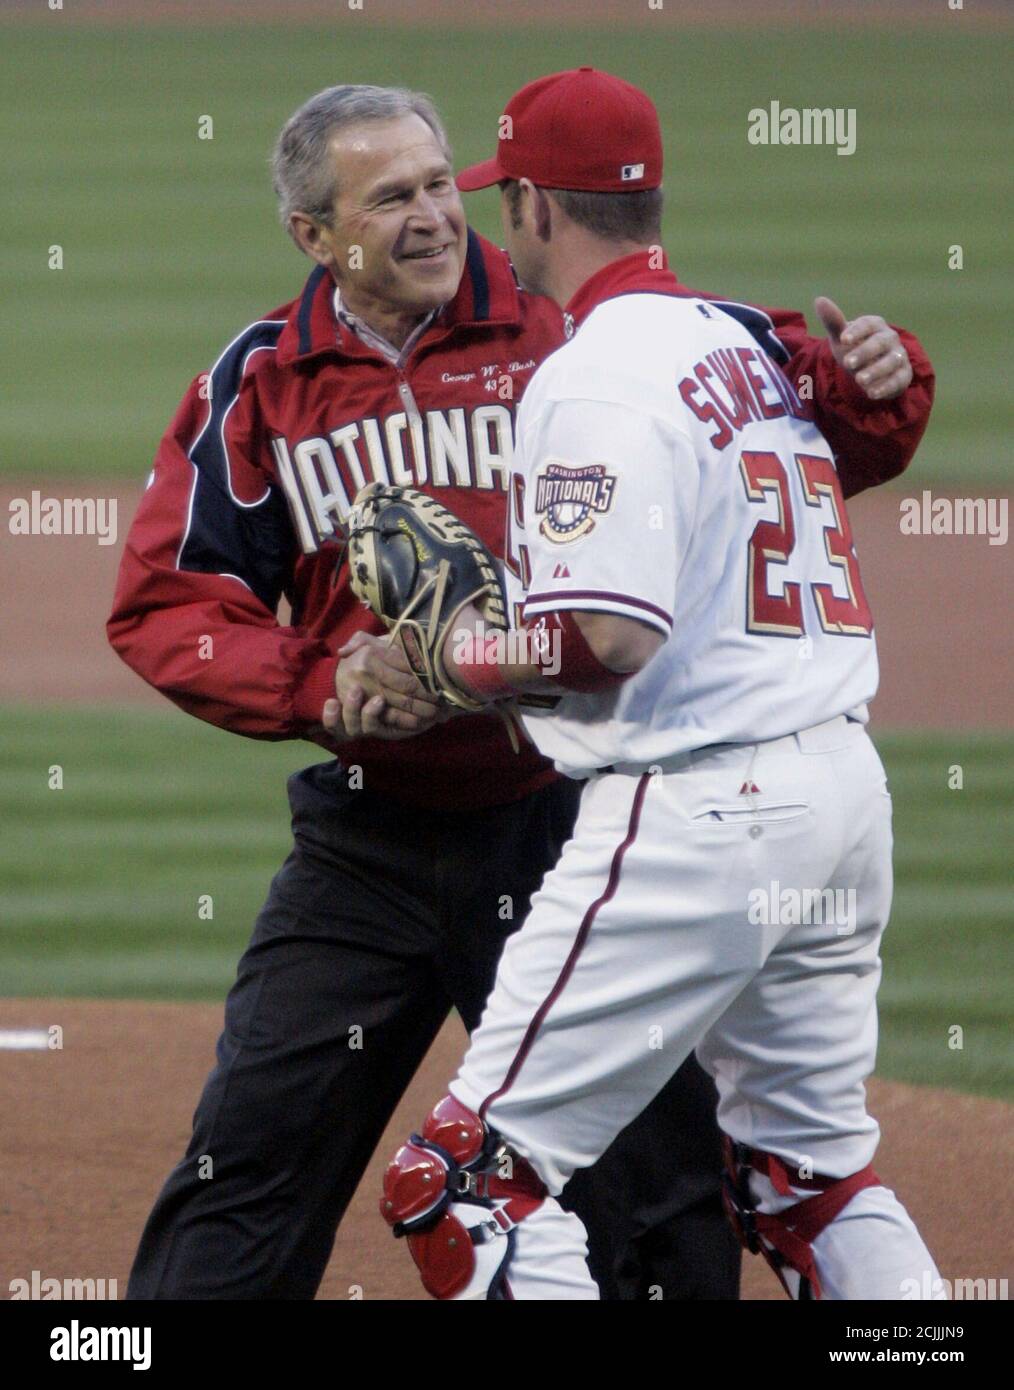 U.S. President George Bush is congratulated by Washington Nationals catcher Brian Schneider (R) after the president threw out the ceremonial first pitch at the Washington Nationals home opener at RFK Stadium in Washington, April 14, 2005. The Nationals are playing the Arizona Diamondbacks in the first regular season baseball game to be played in Washington in 34 years. REUTERS/Jim Bourg  JRB/SV Stock Photo